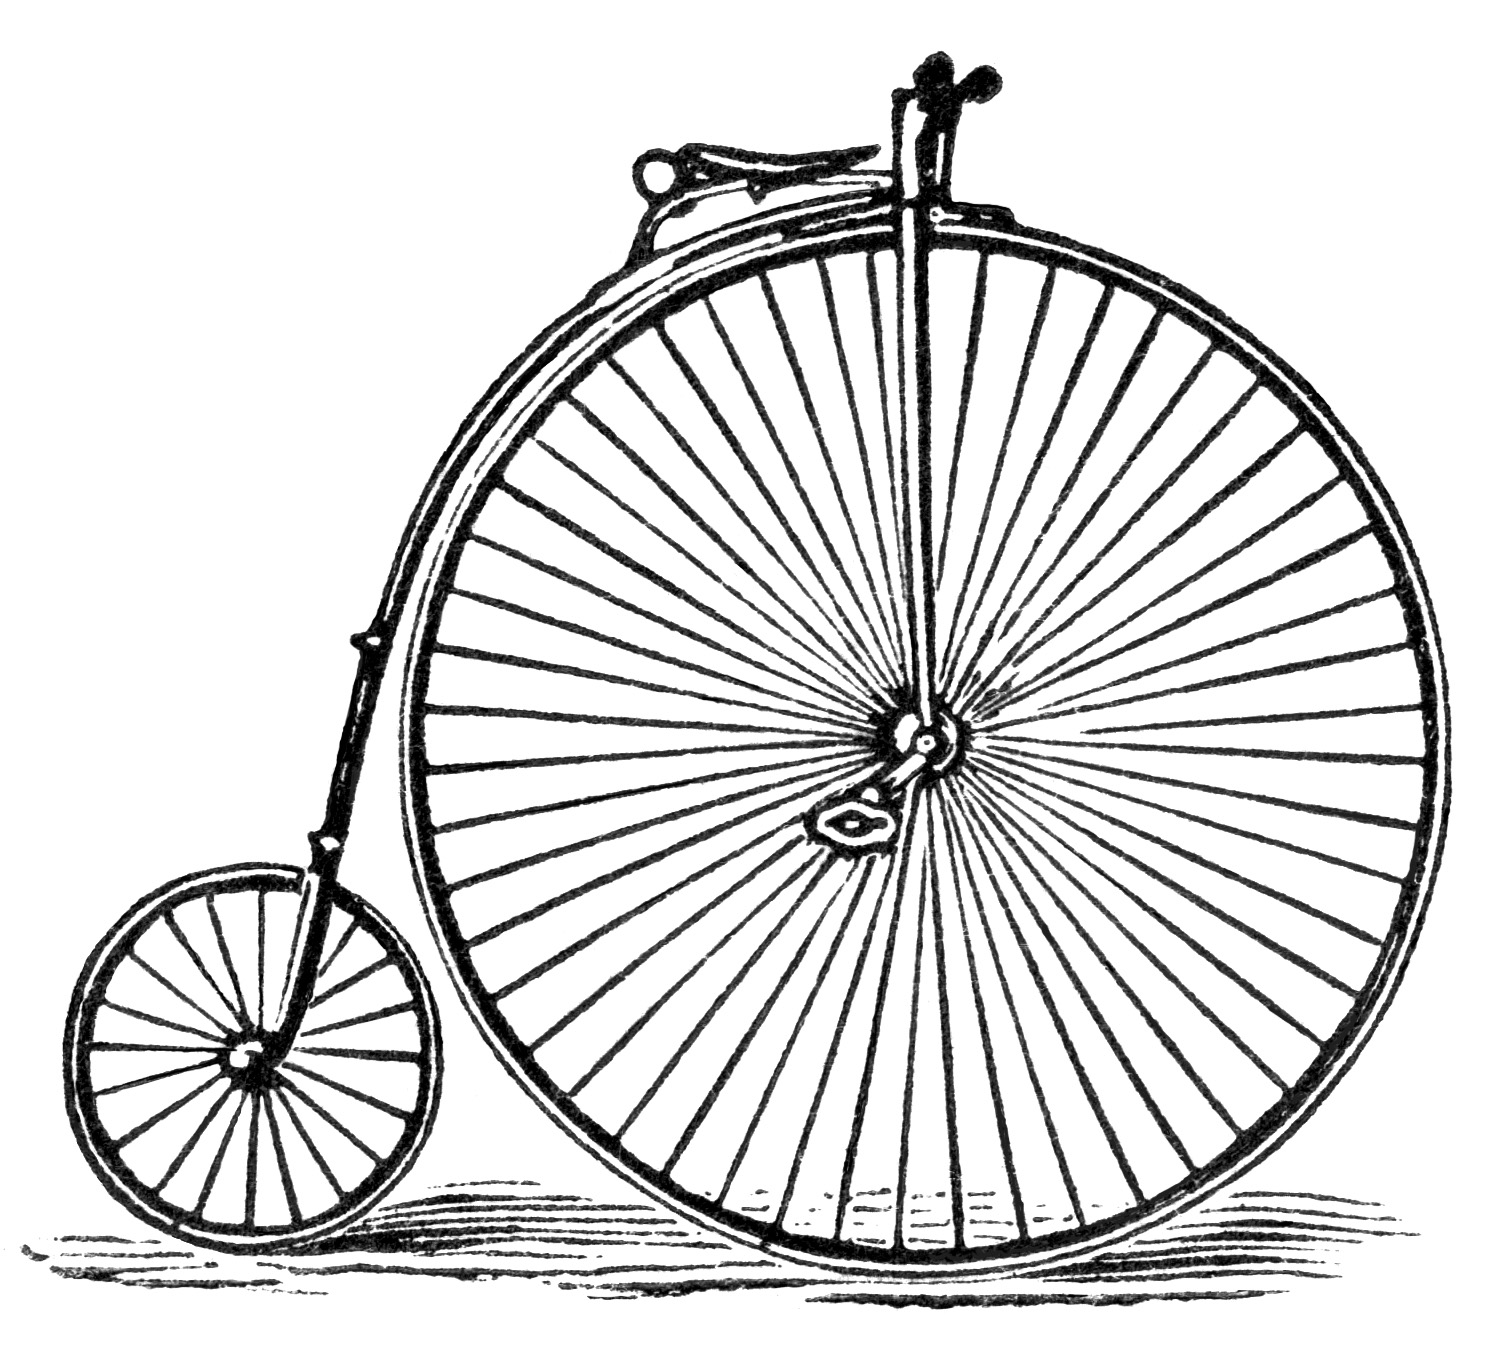 Here Is A Black And White Clipart Version Of The Bicycle From The Ad